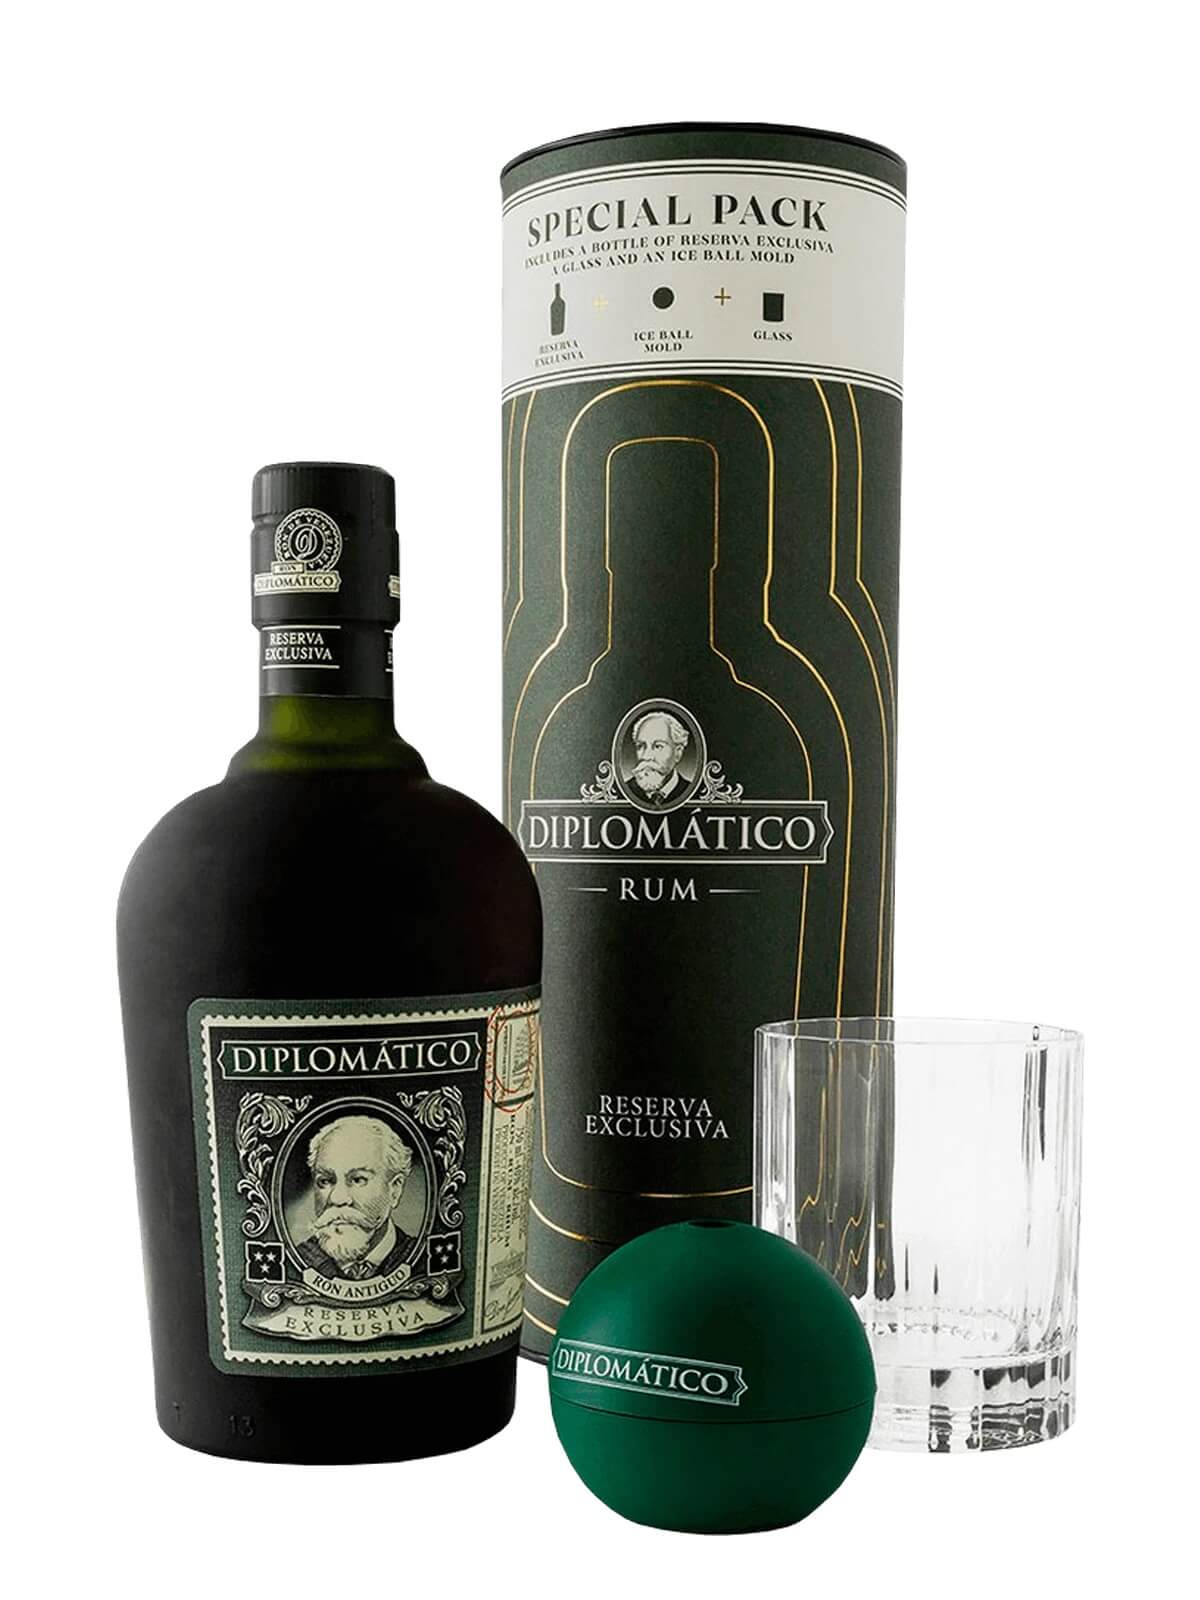  Diplomático  Exclusiva Rom Special Pack (Glas og Ice Ball Mold)